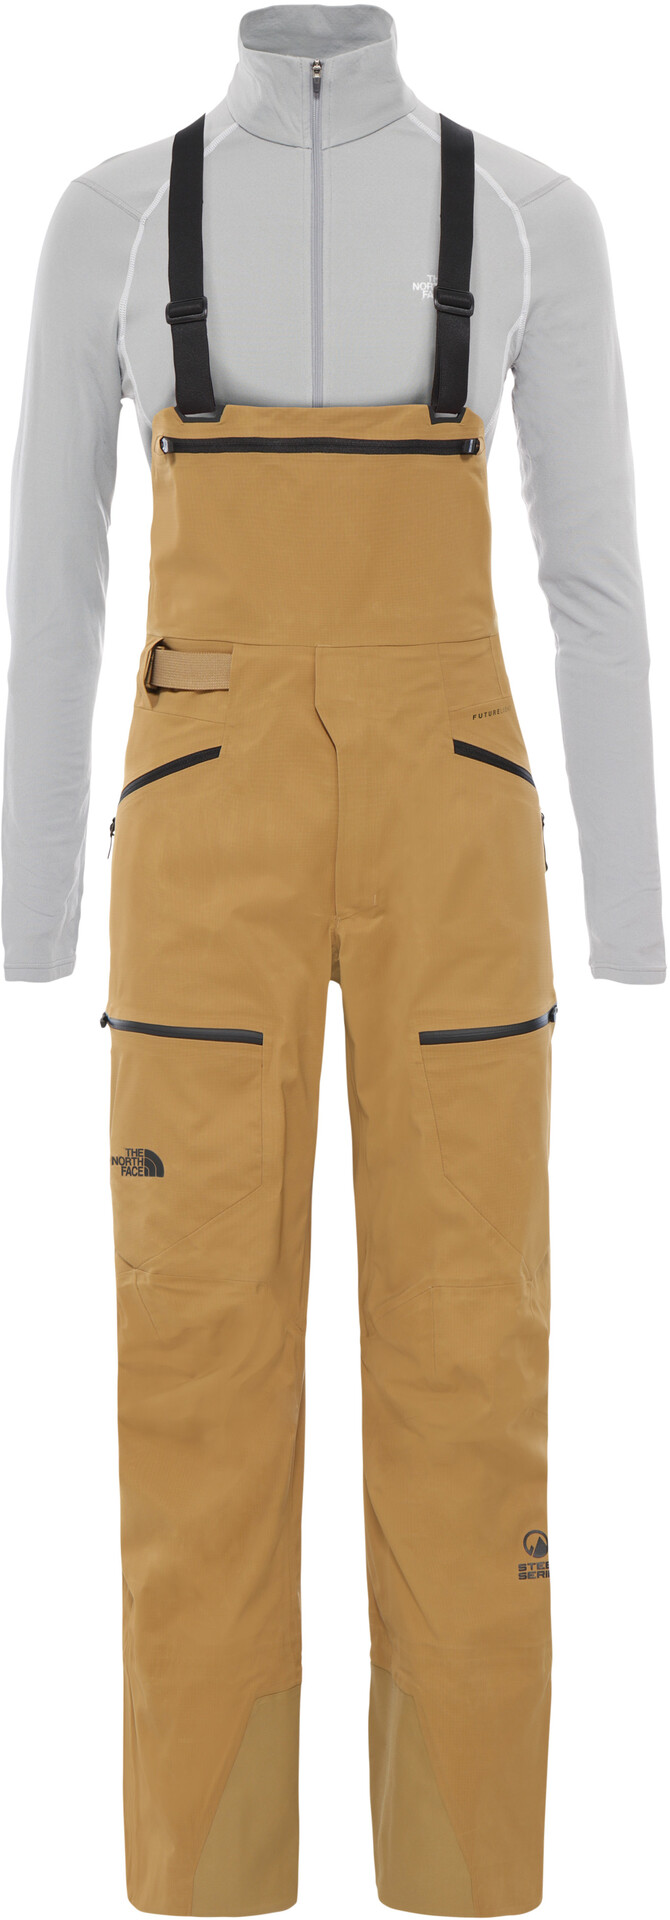 north face purist pant womens